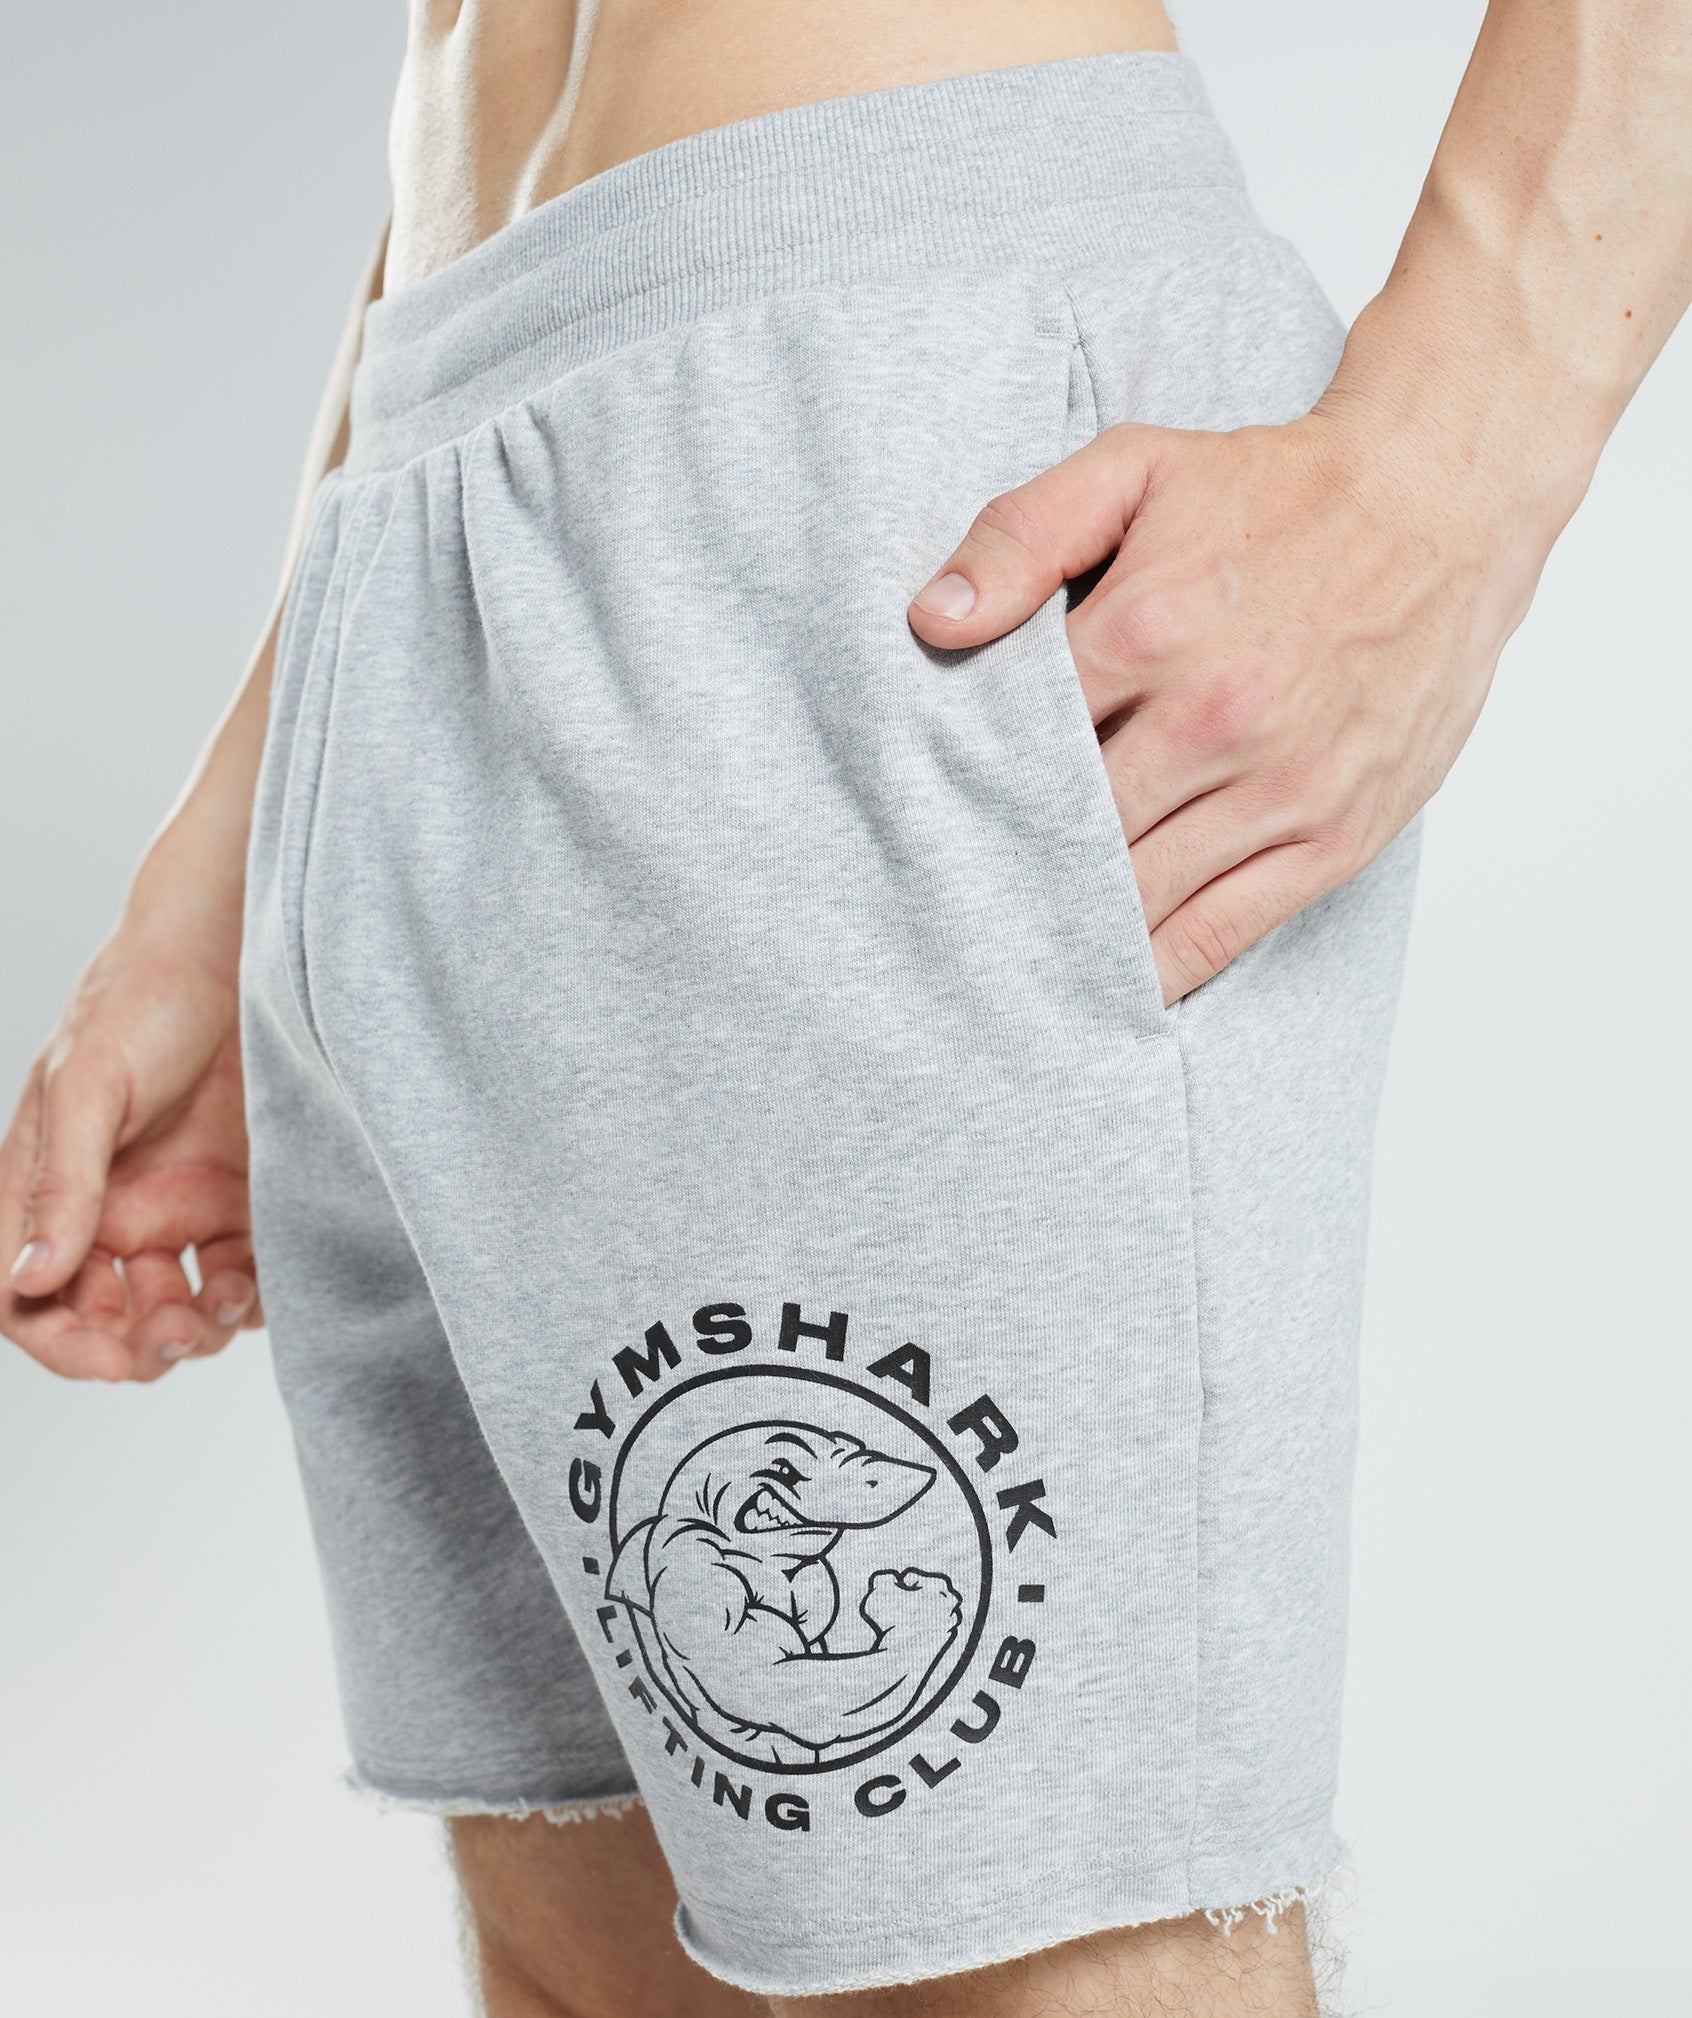 Legacy Shorts in Light Grey Core Marl